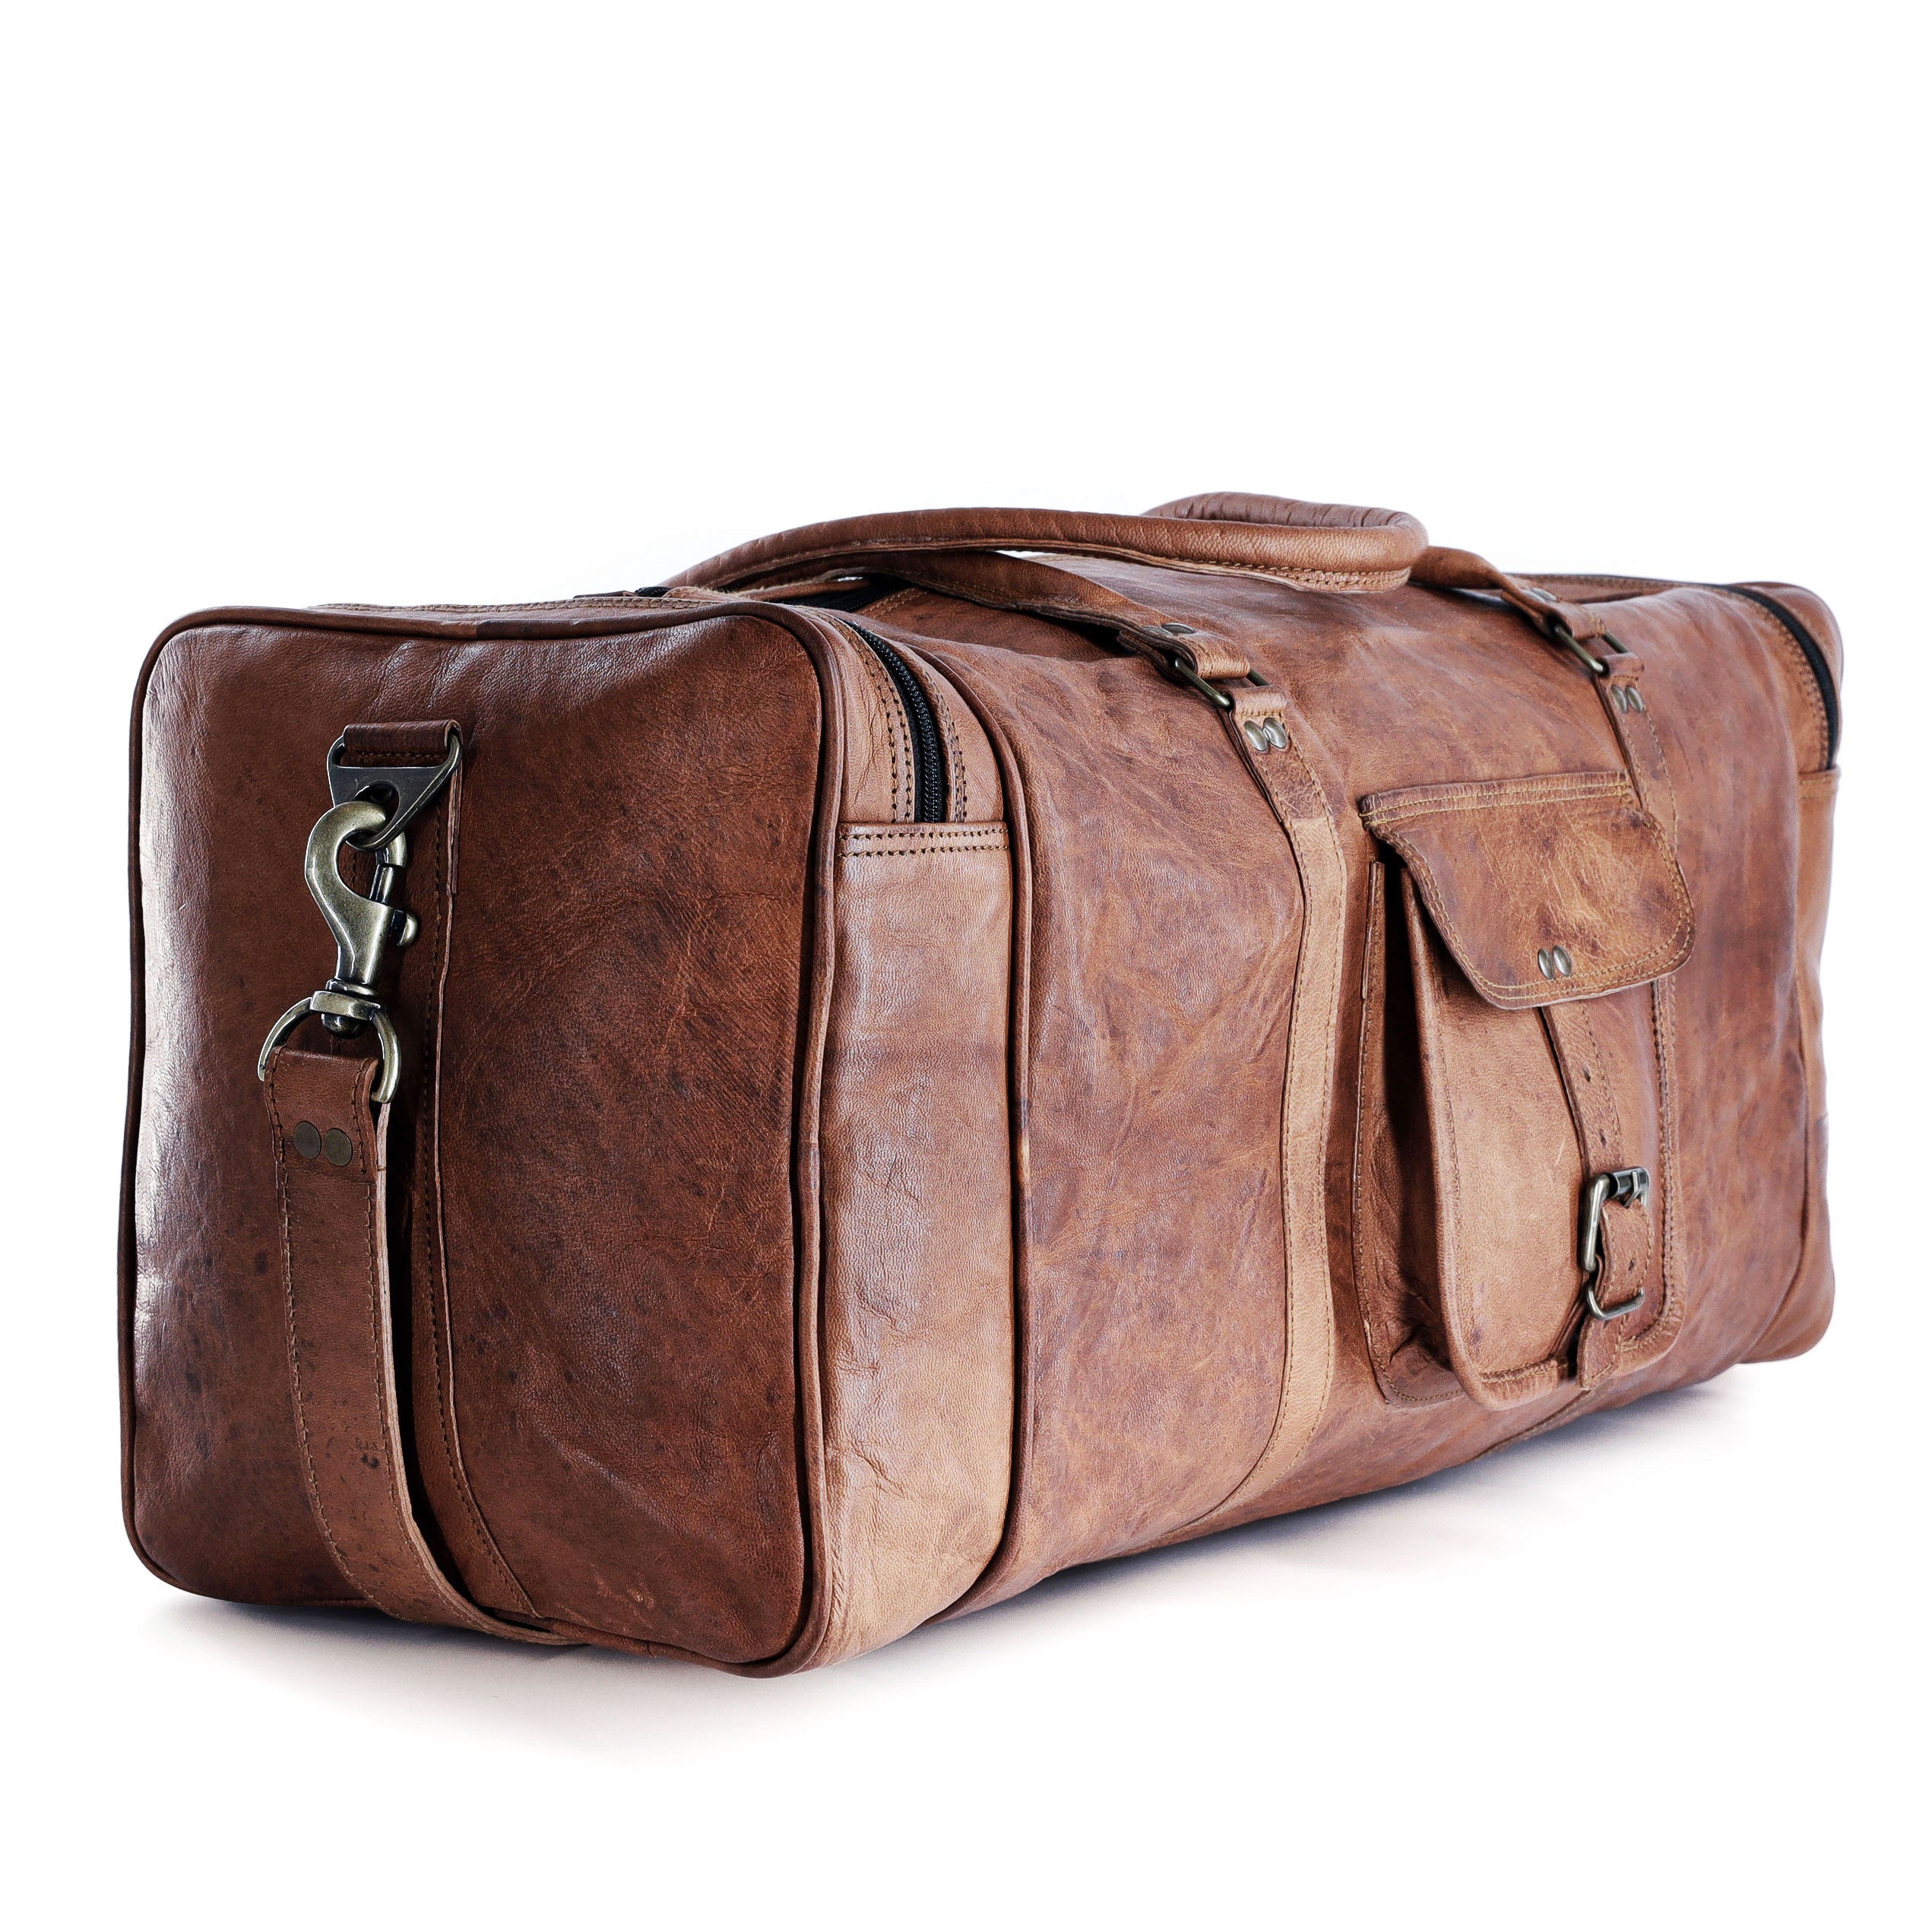 KomalC Leather Travel Duffel Bags for Men and Women Full Grain Leather